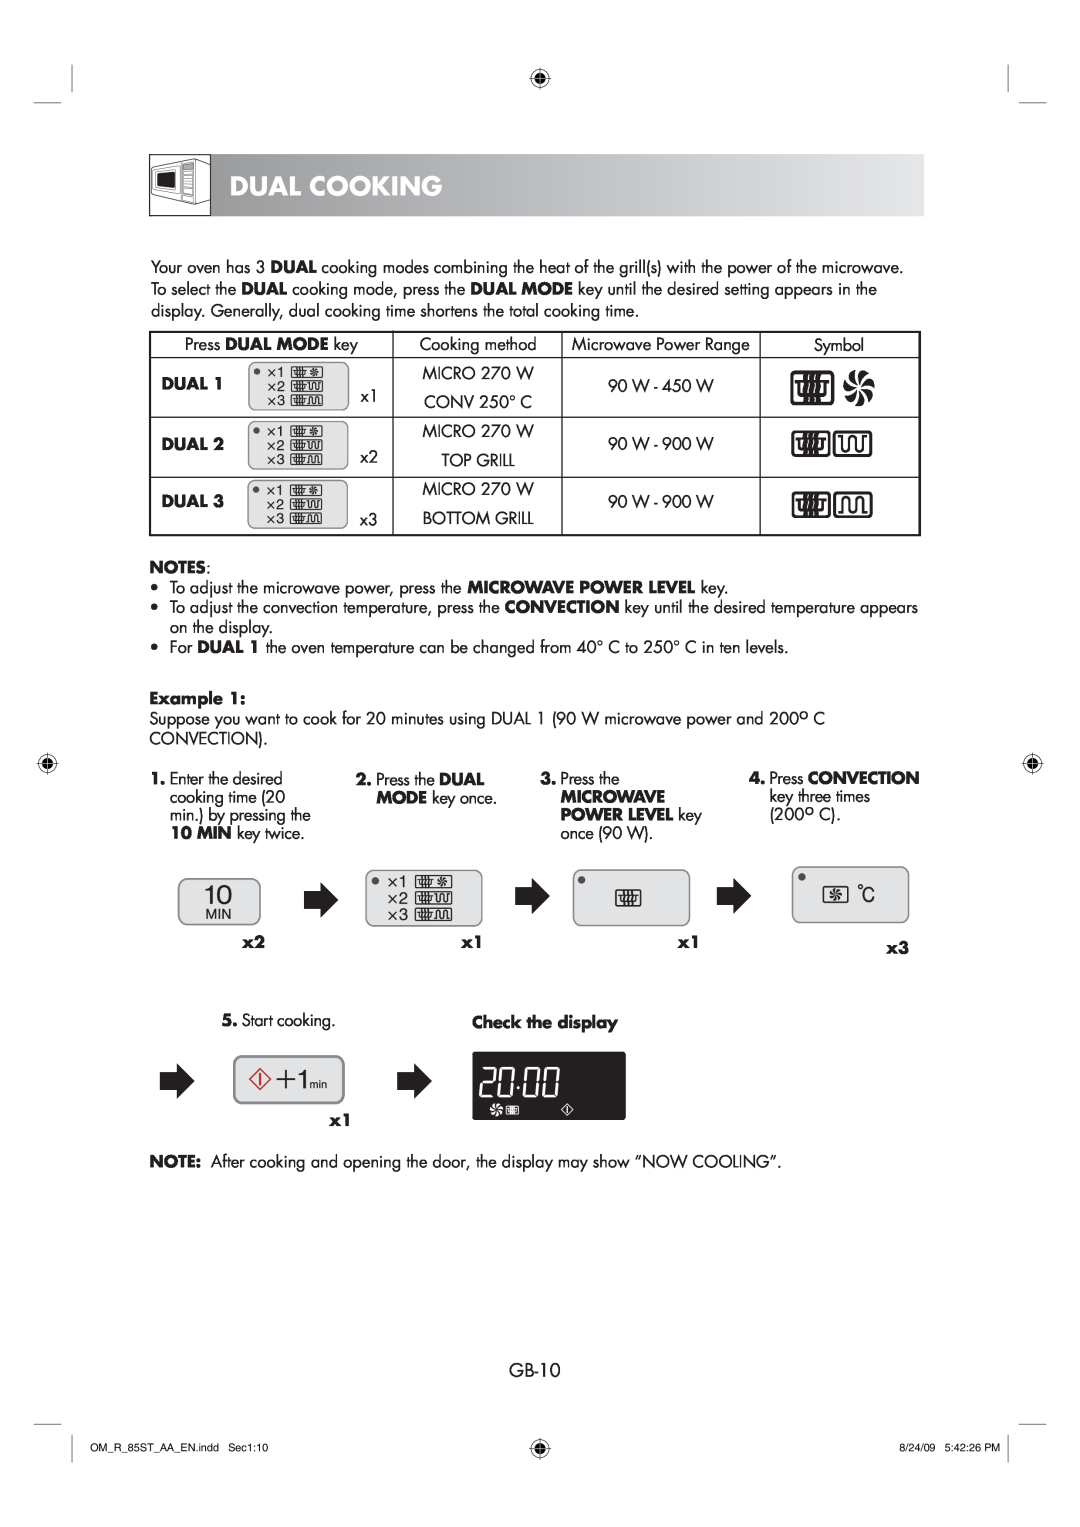 Sharp R-85ST-AA operation manual Dual Cooking, GB-10 